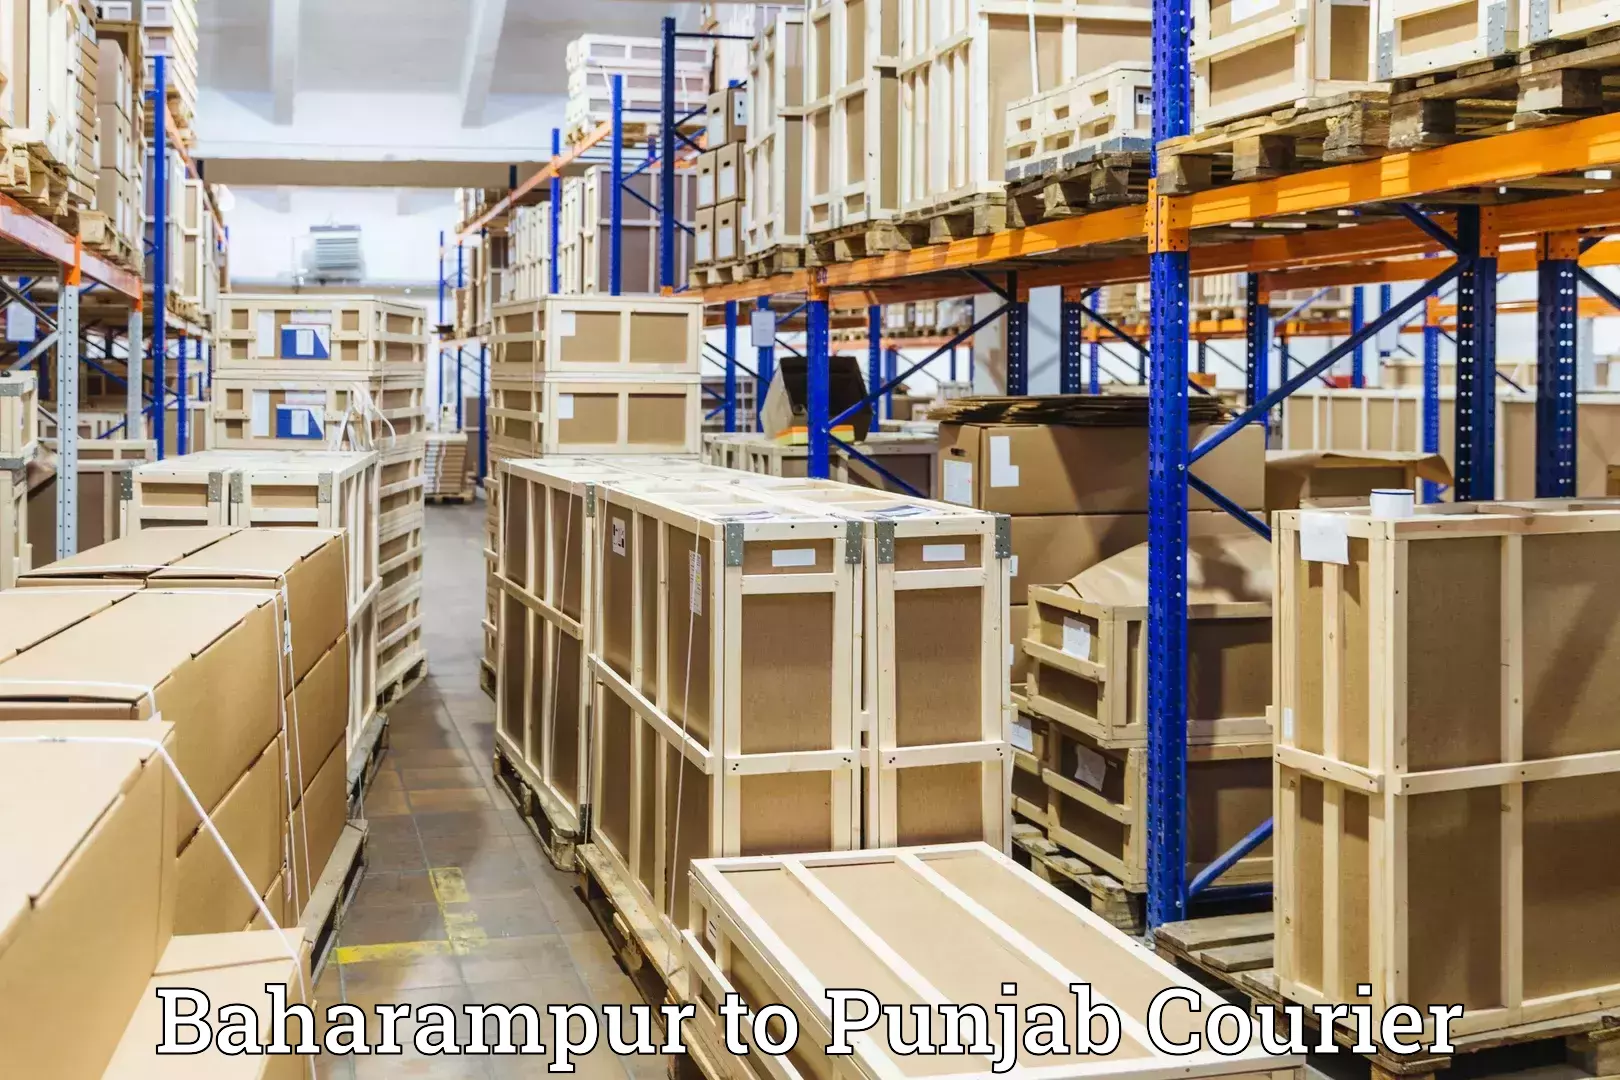 Luggage delivery providers Baharampur to Pathankot